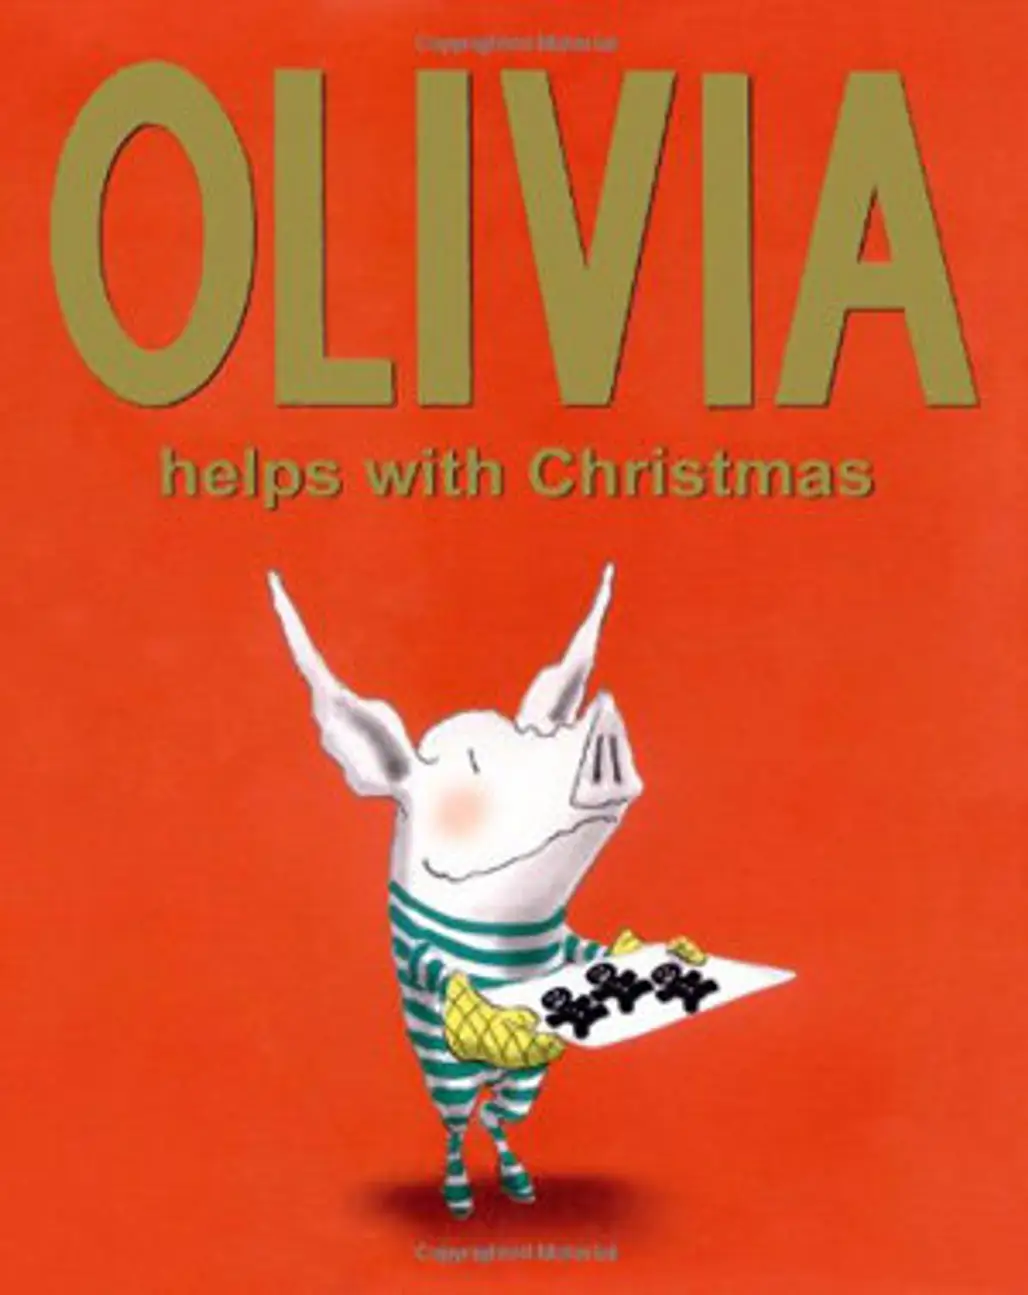 “Olivia Helps with Christmas” by Ian Falconer